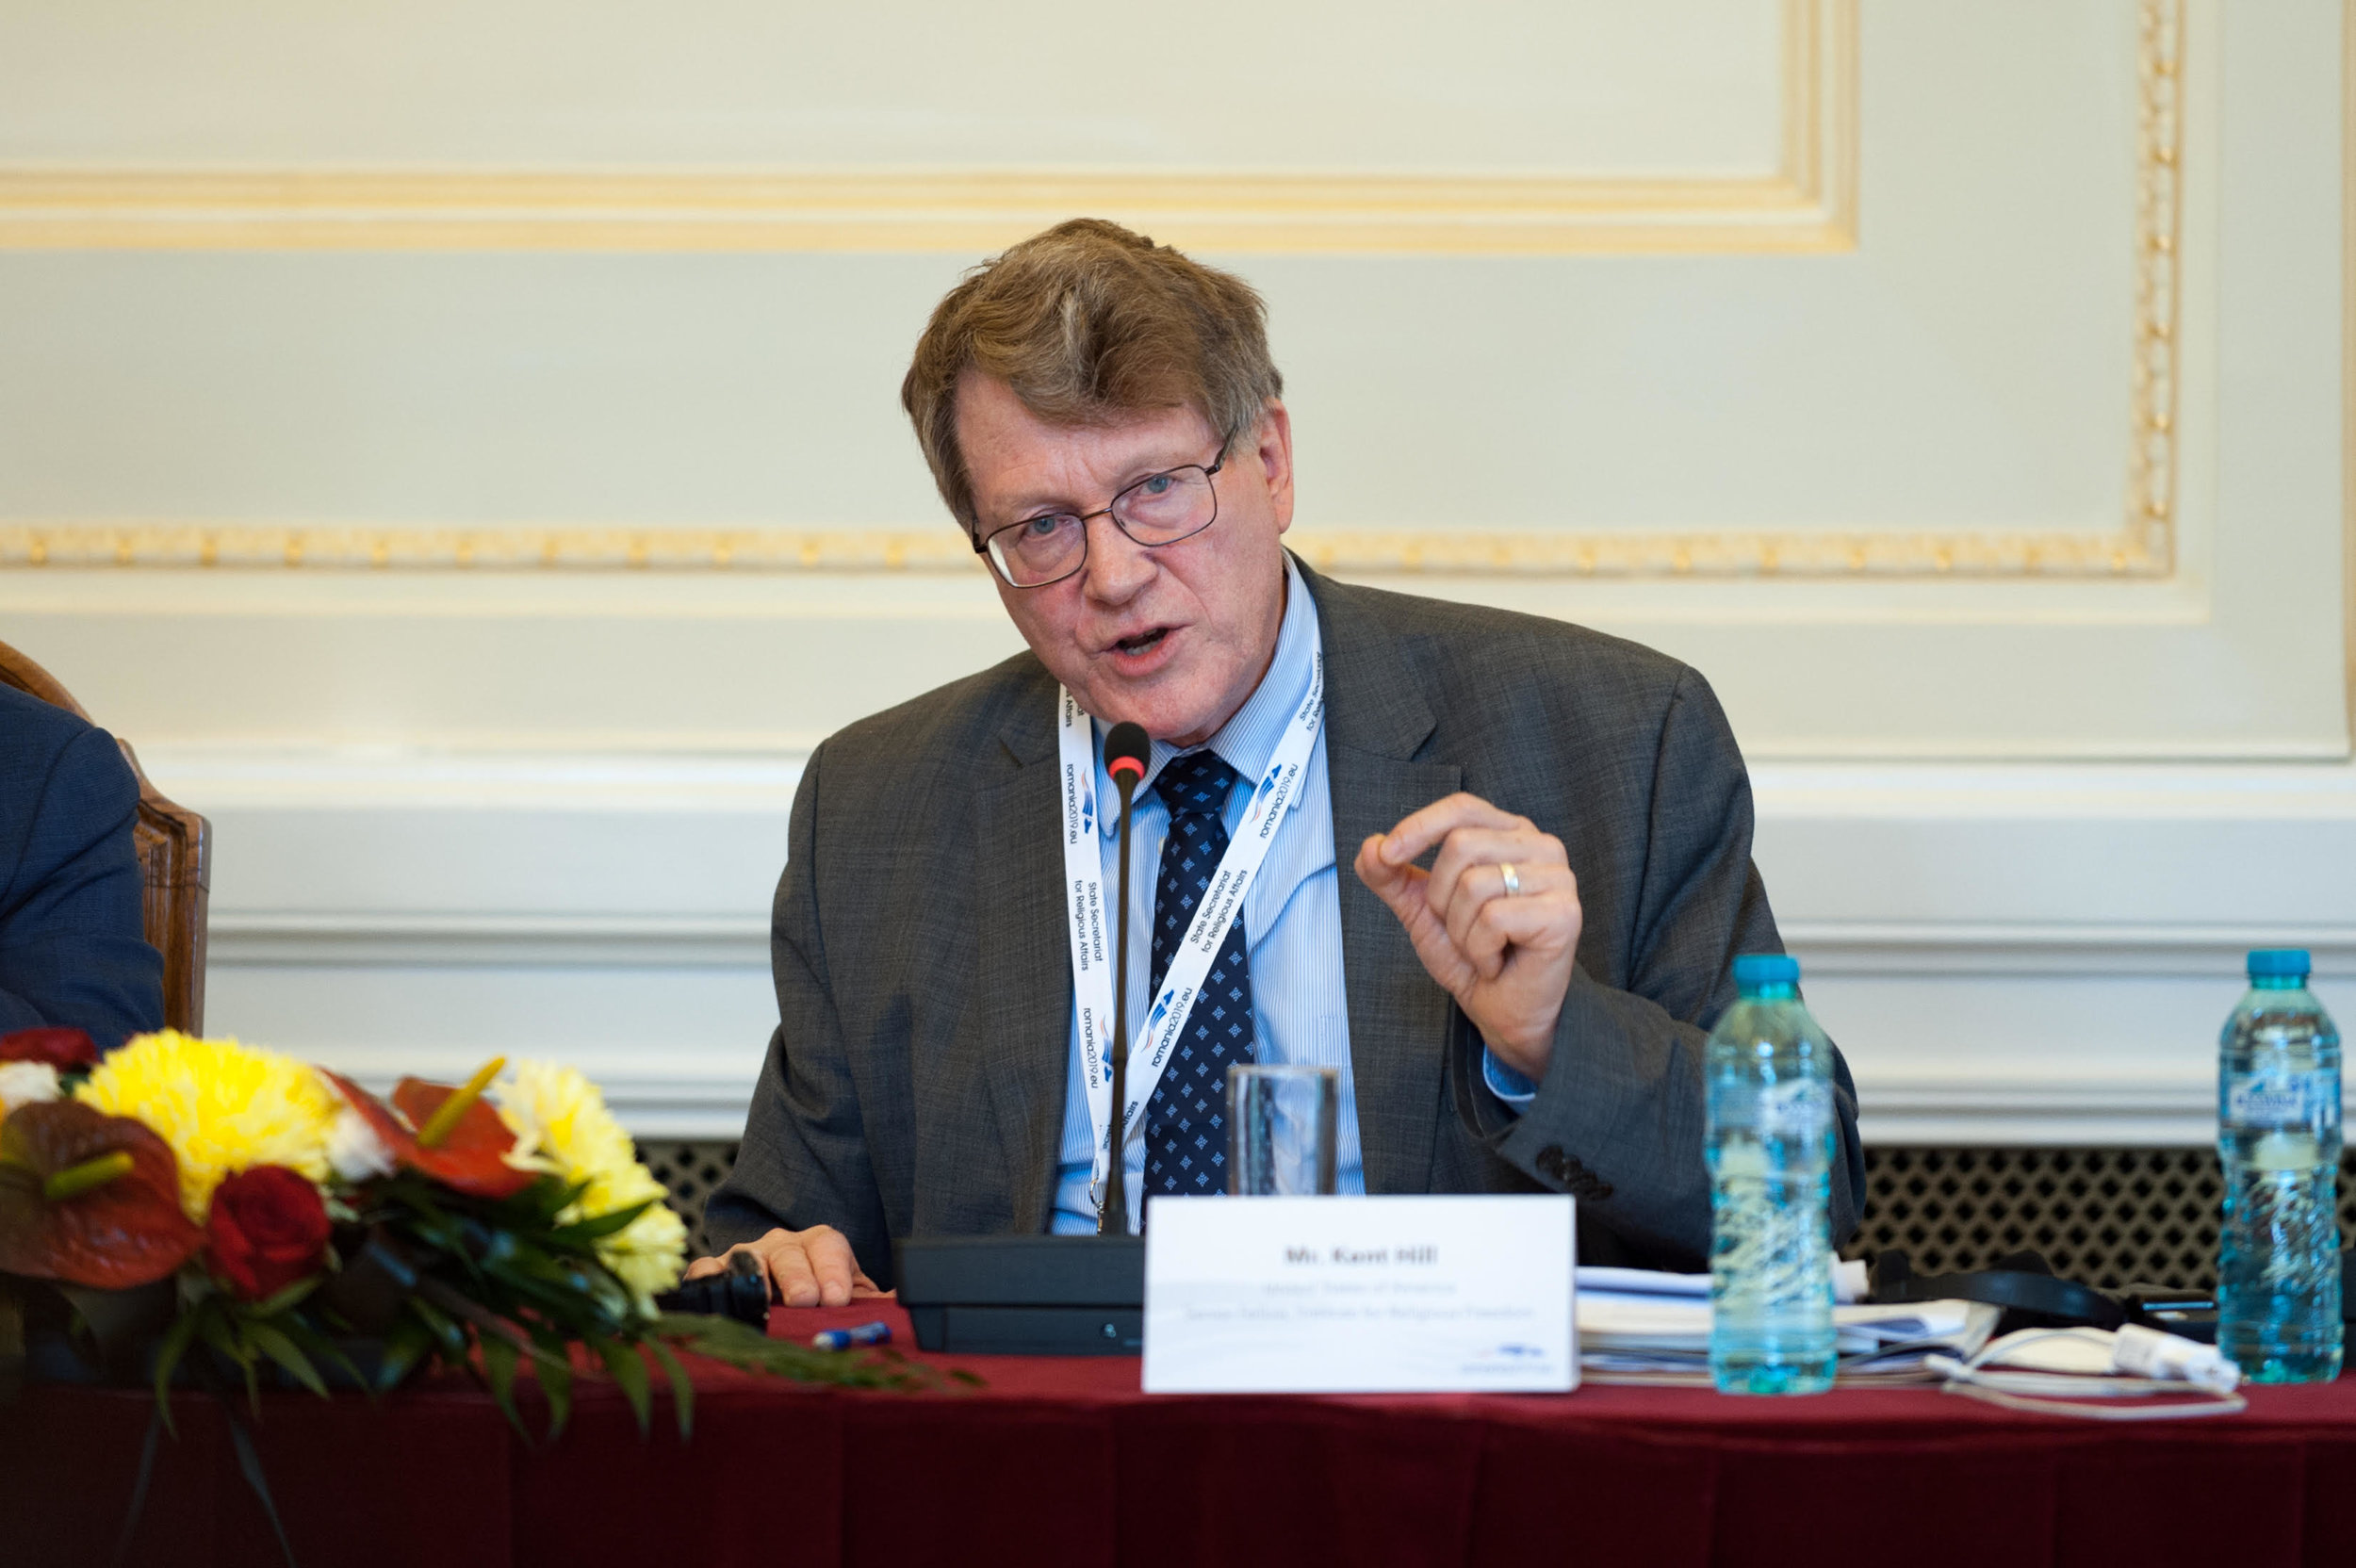 Kent Hill, Senior Fellow for Eurasia, Middle East, and Islam delivers remarks in Bucharest, Romania.